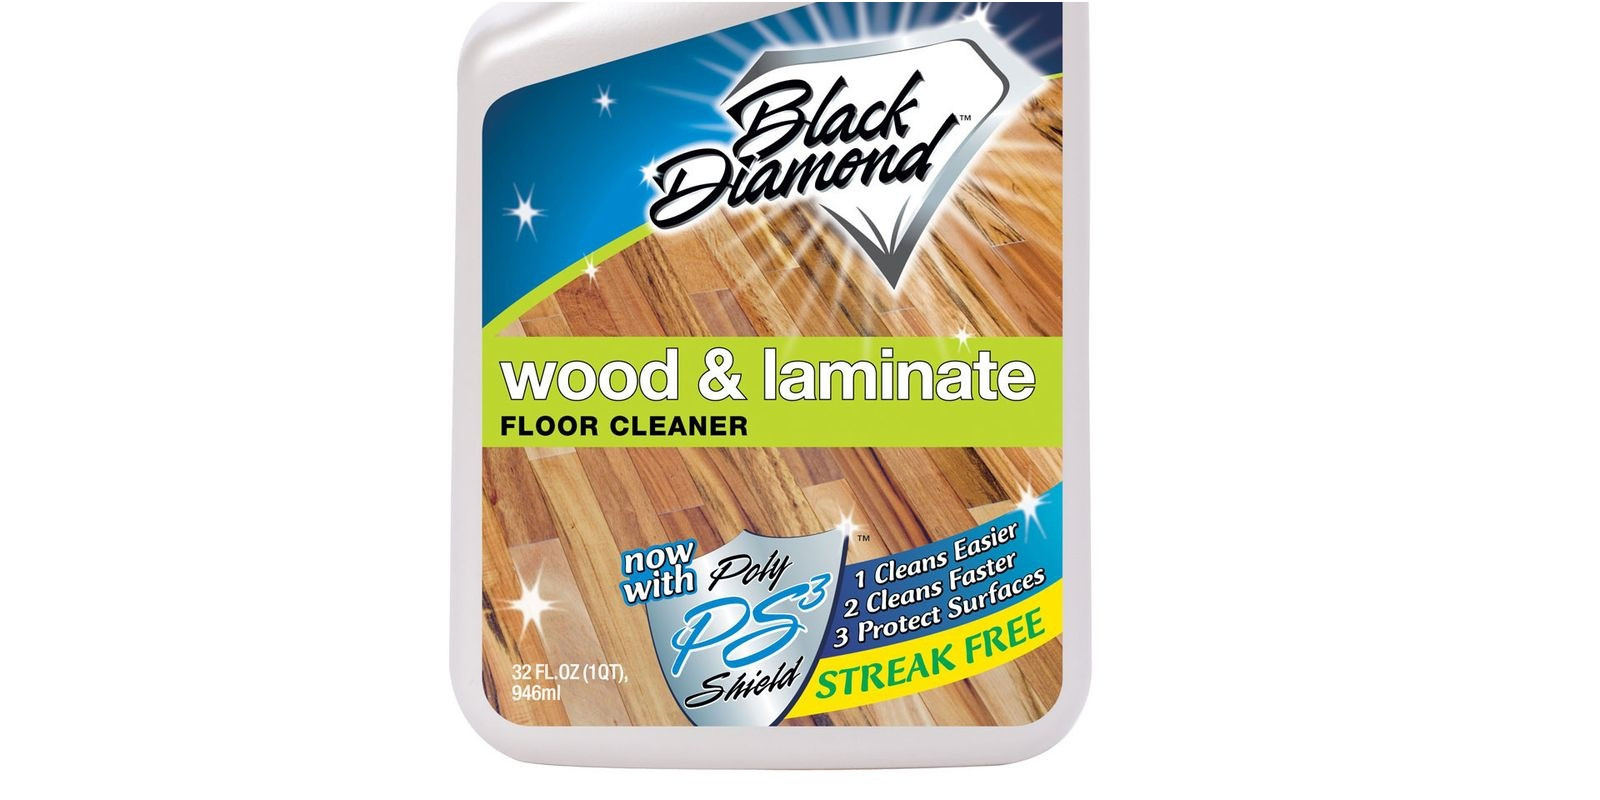 hardwood floor cleaning with white vinegar of how to take care of laminate flooring flooring design with regard to floor black diamondod and laminate floor cleaner review vinegar